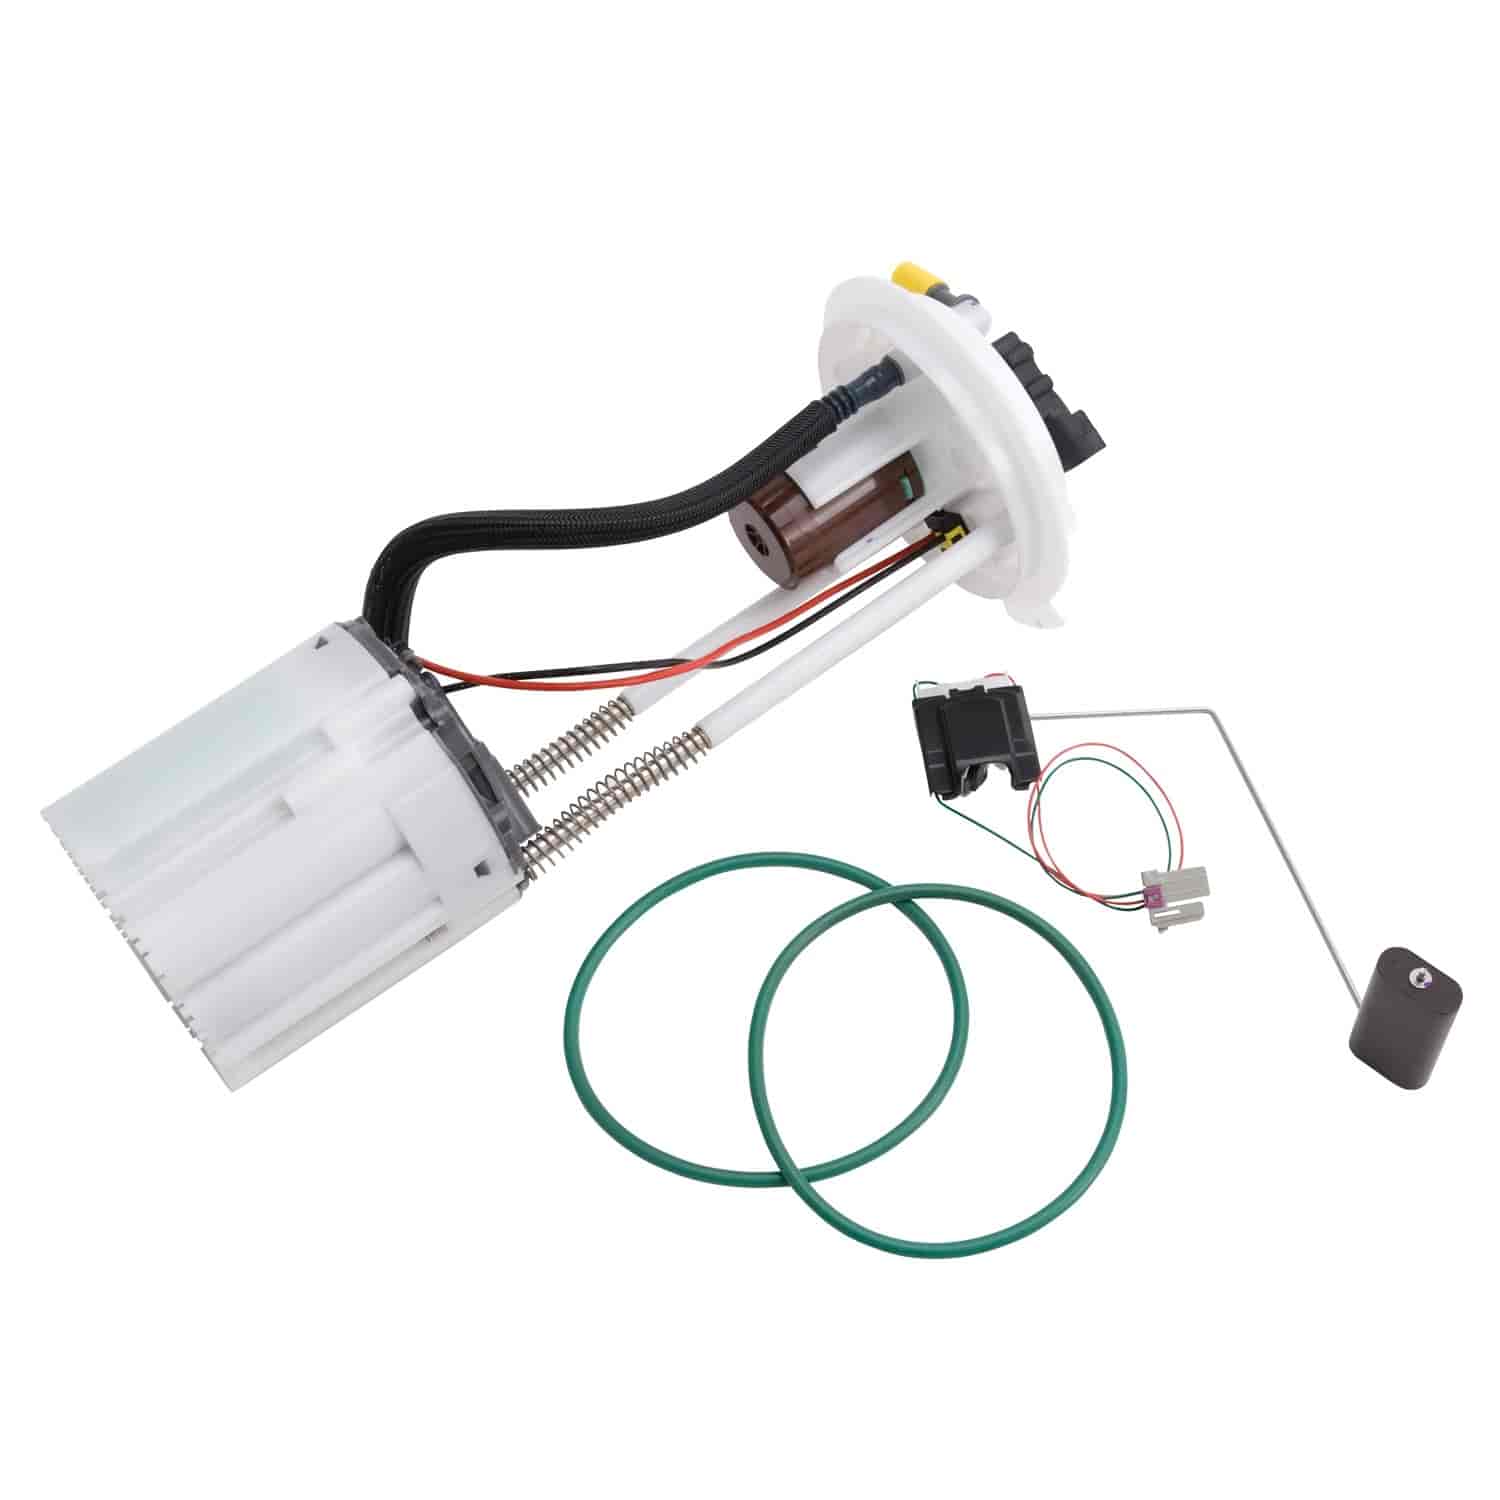 E-Force Supercharger Supplemental Fuel Pump Kit 2003-2007 GM 1500 Truck Returnless-style Fuel System